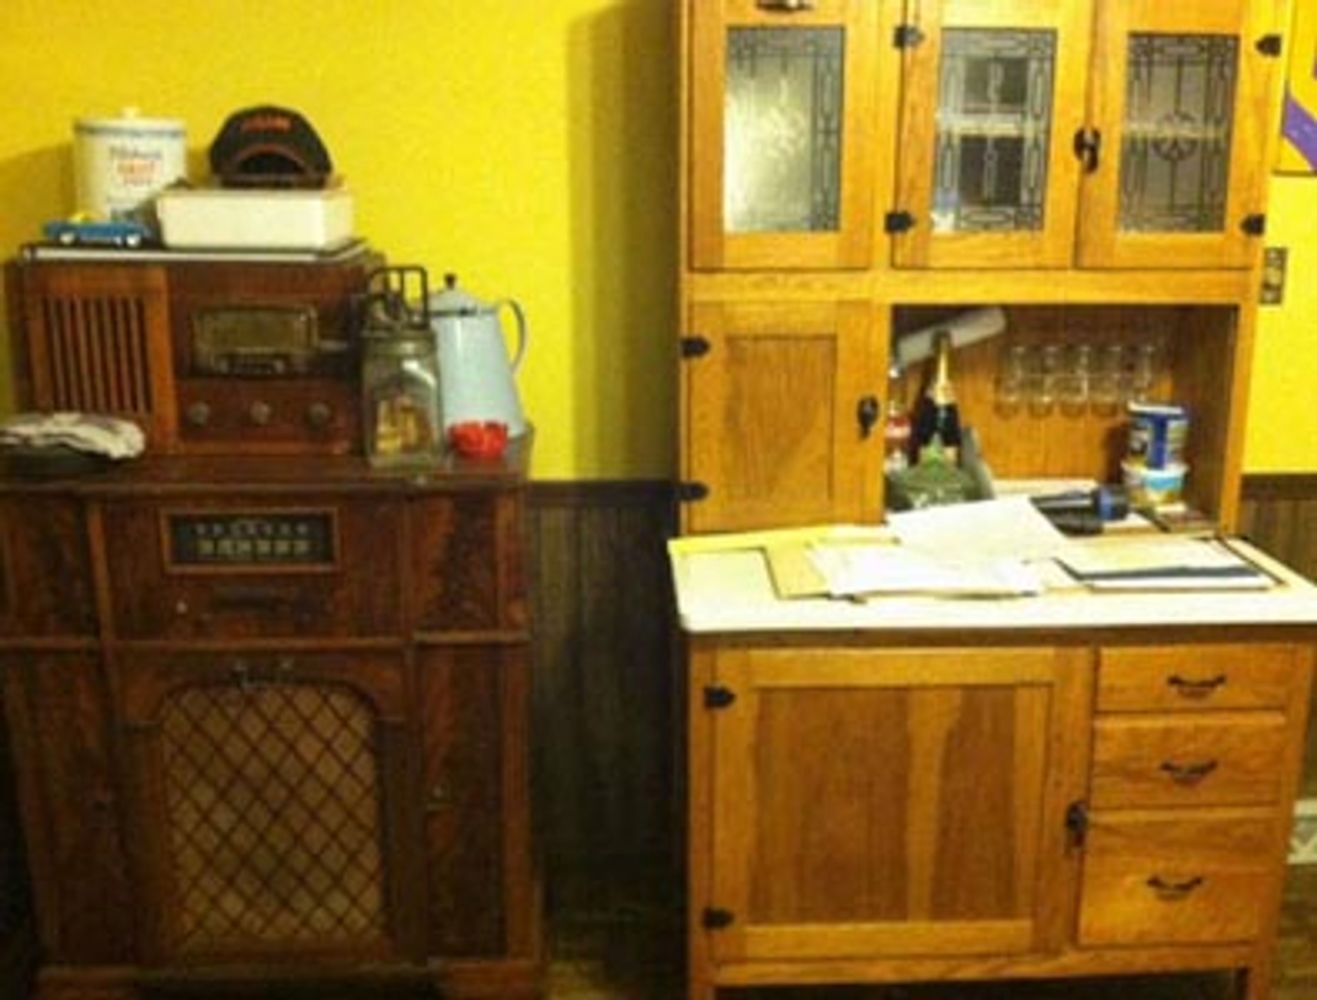 Southern Illinois furniture restoration of a cabinet and radios. Southern Illinois furniture repair.